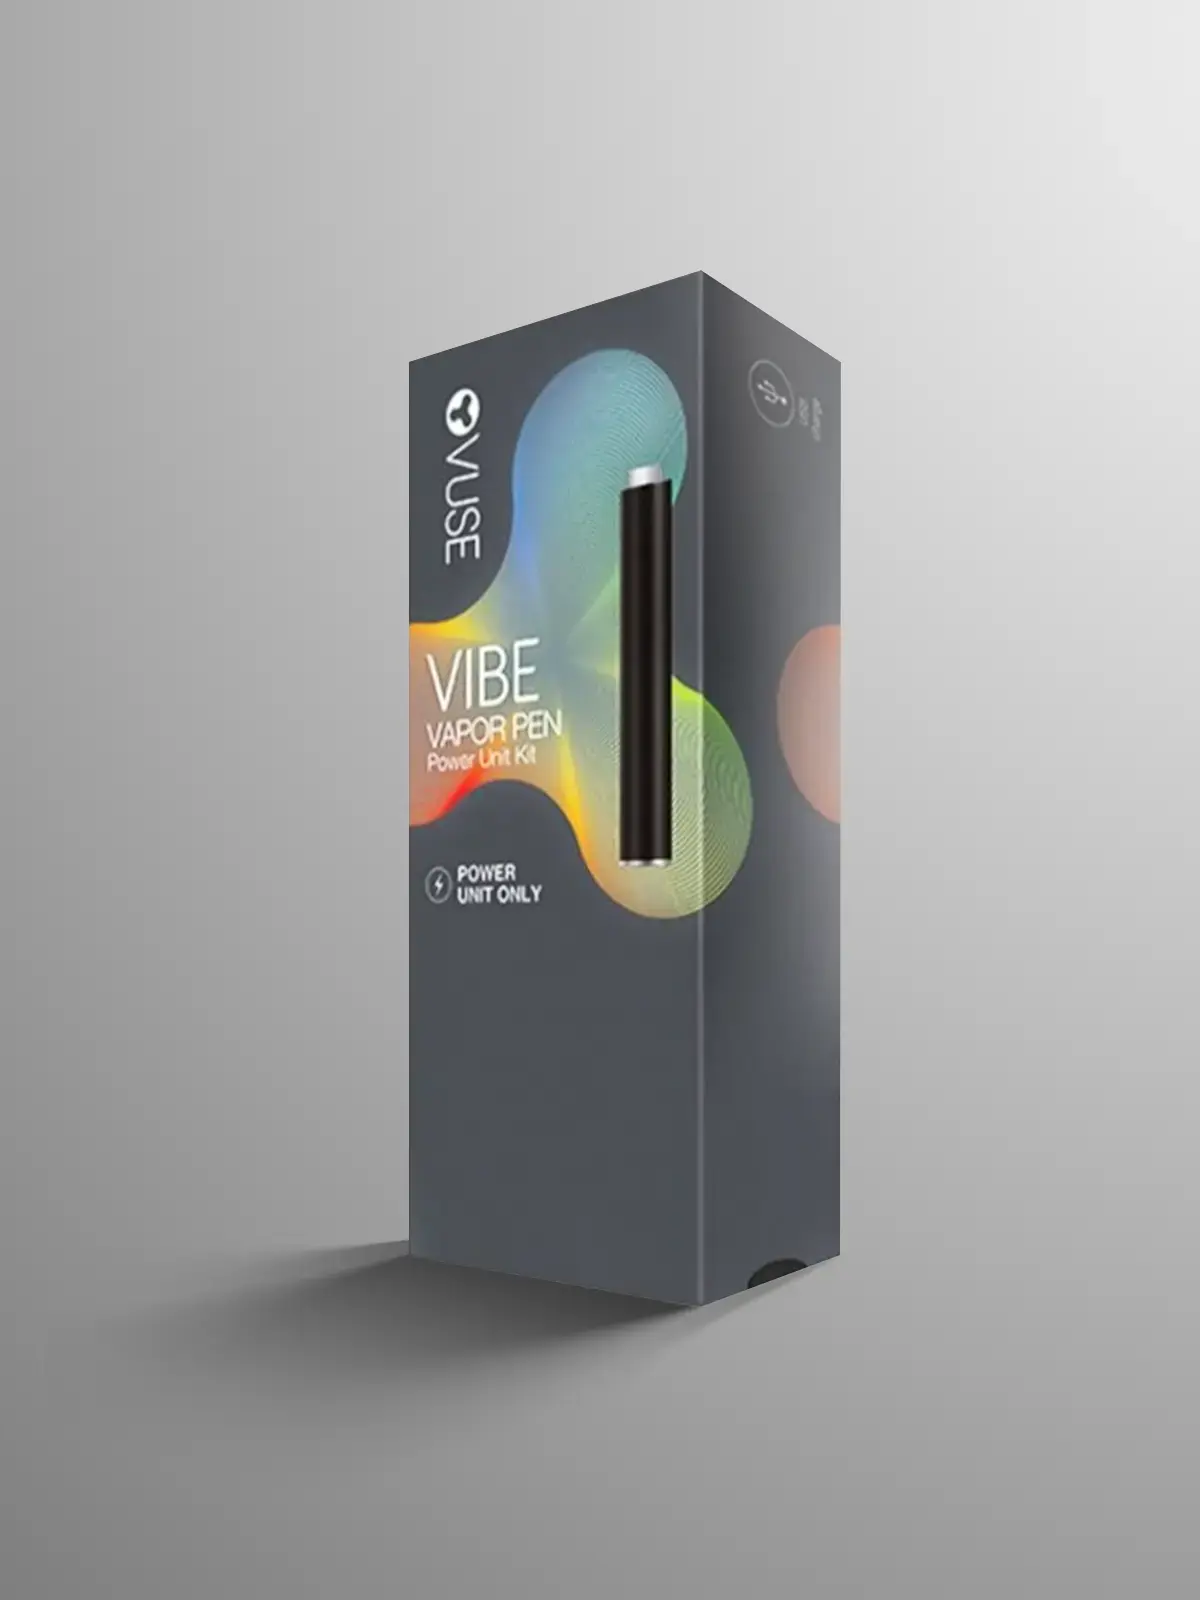 Vuse Vibe Power Unit Kit in its box, standing on its own in front of a plain background